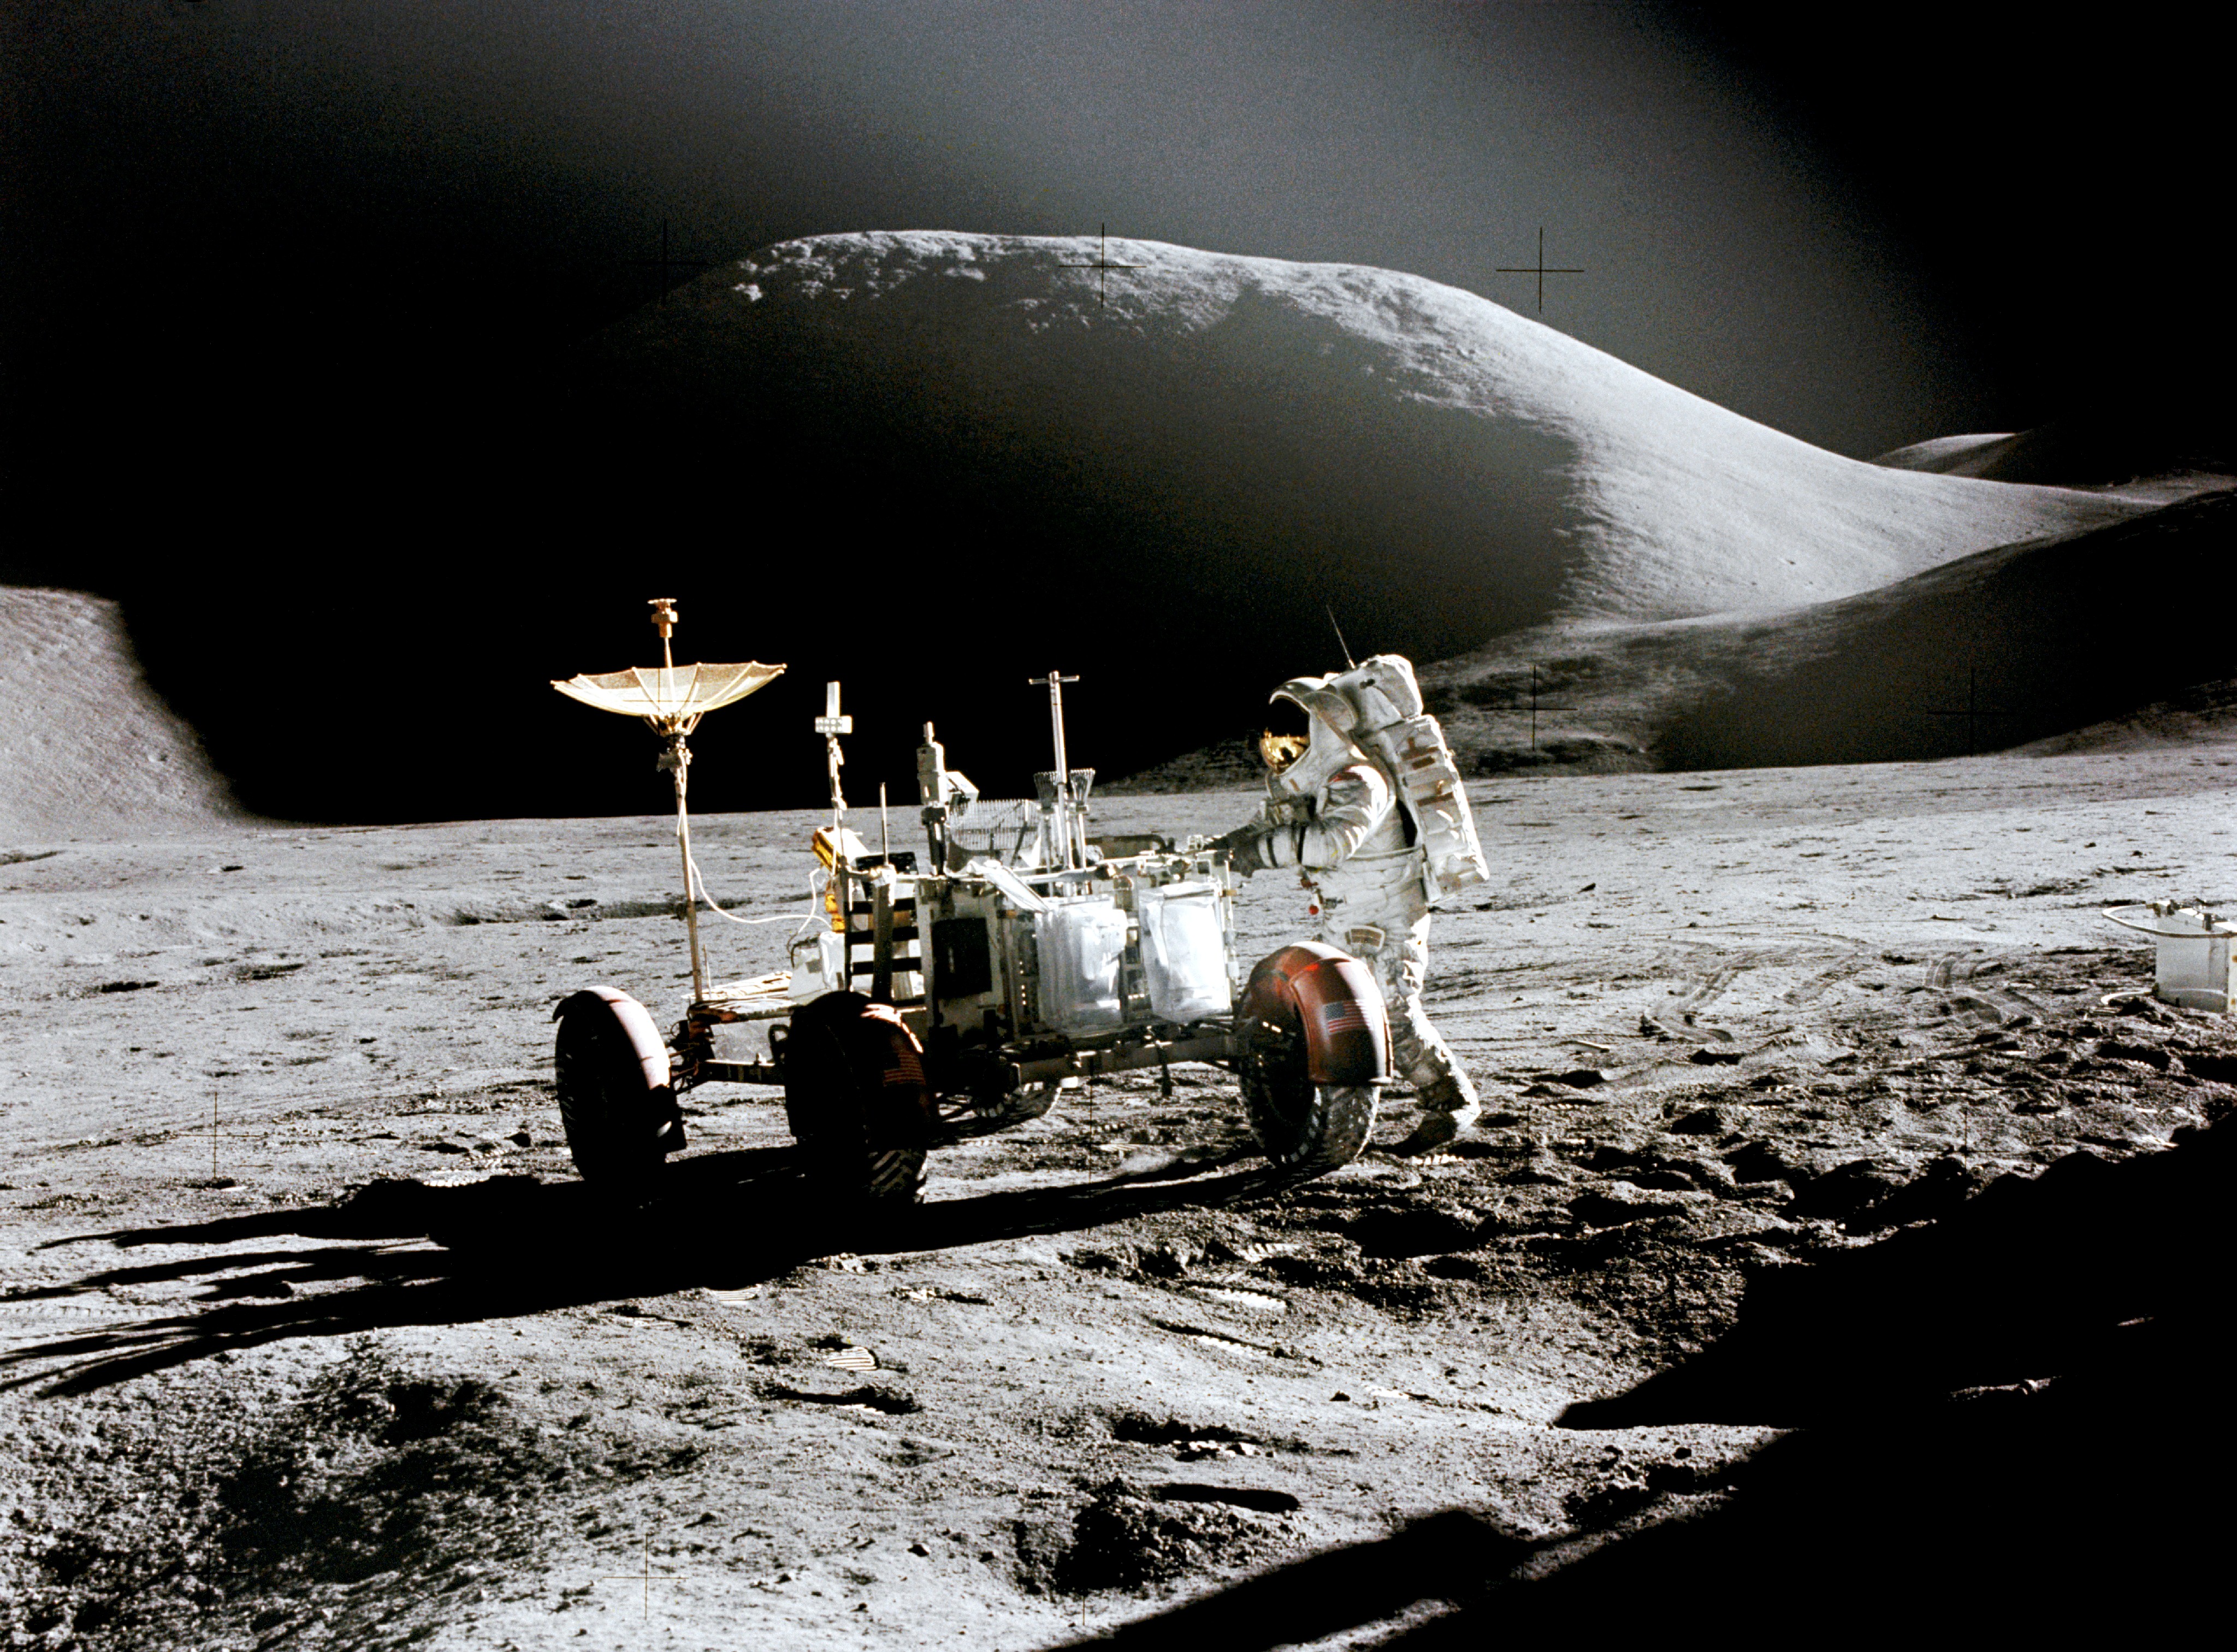 An astronaut is standing on the Moon next to a moon buggy rover. A big hill looms in the background.